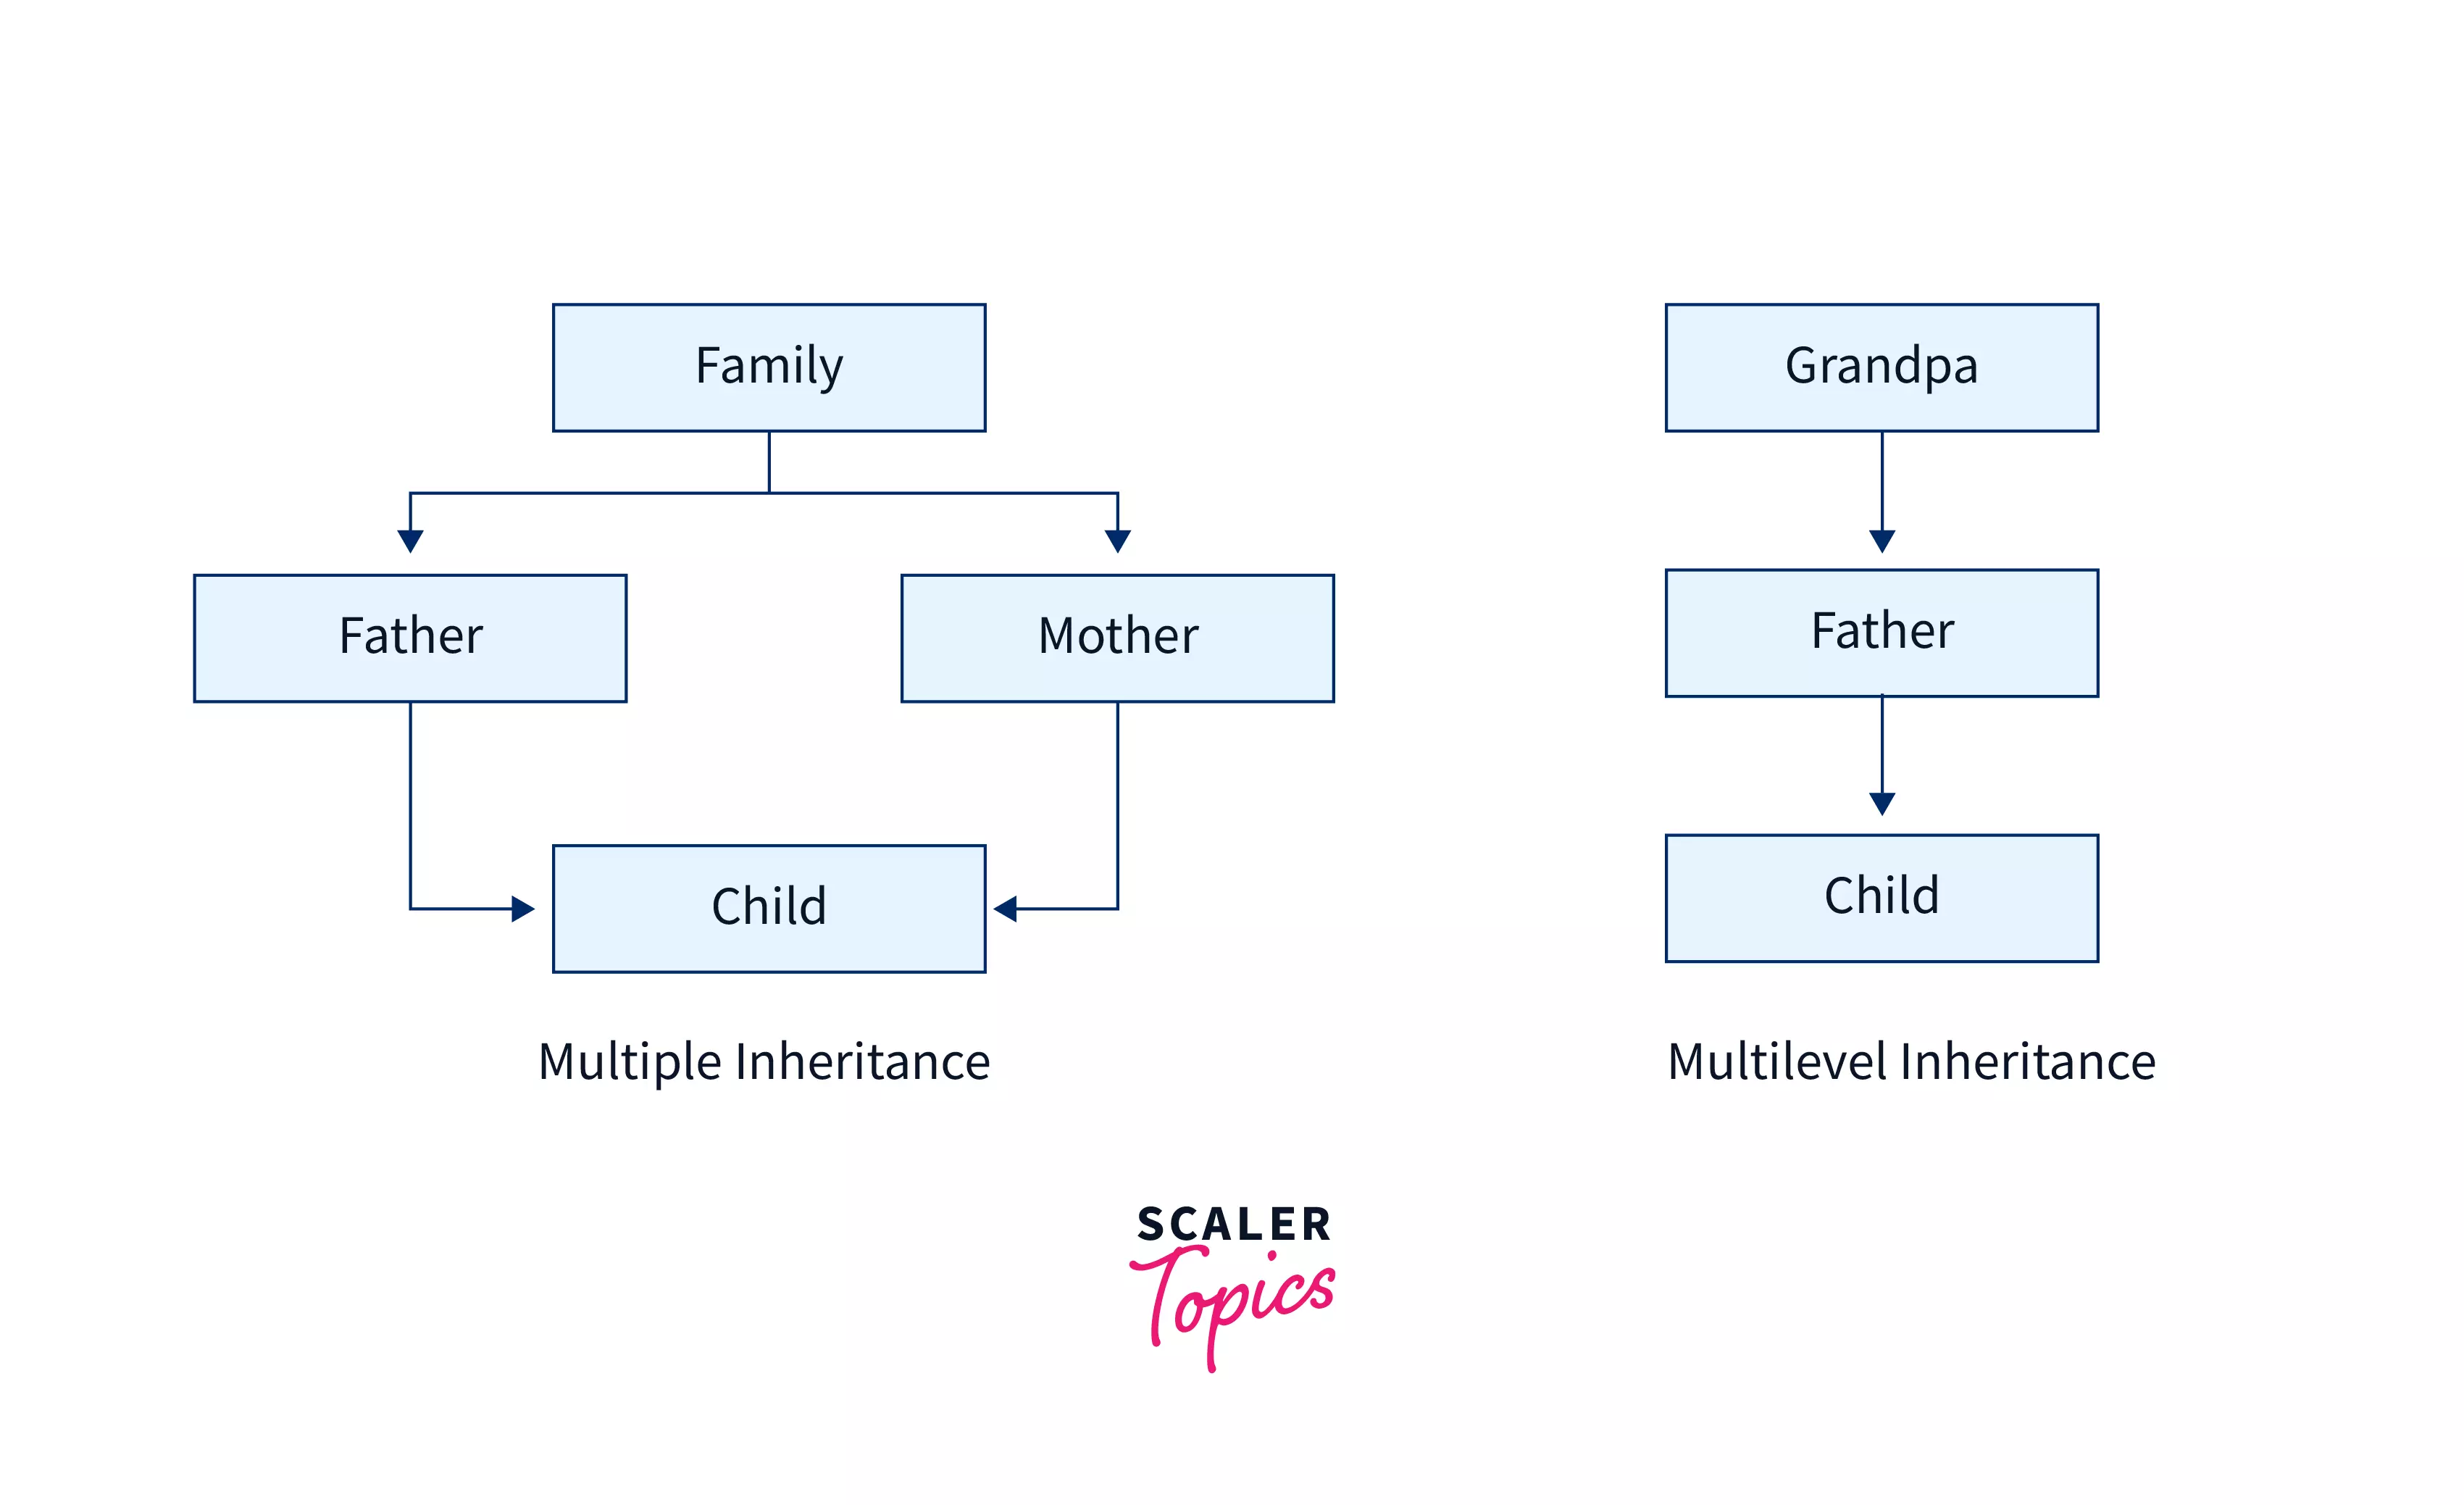 ANALOGY IMAGE SHOWING HOW MULTIPLE INHERITANCE IS DIFFERENT FROM MULTILEVEL INHERITANCE